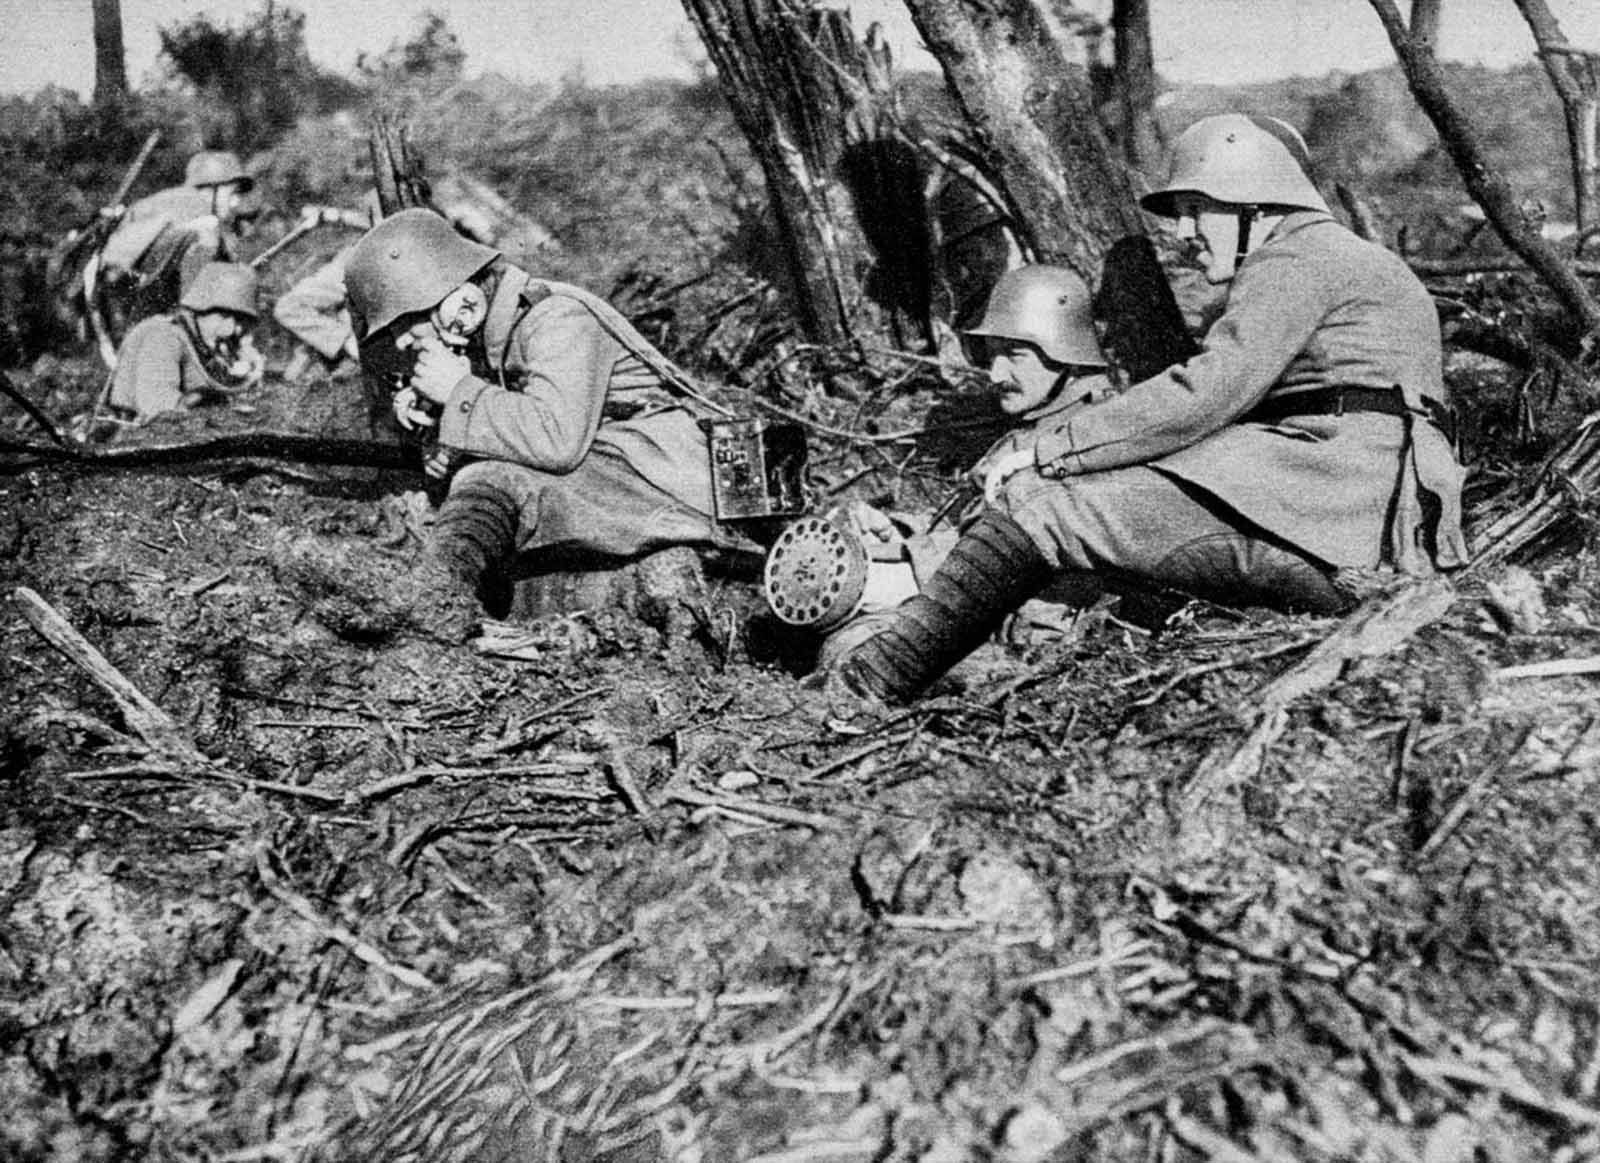 A German field telephonist relays artillery requests from the front lines.